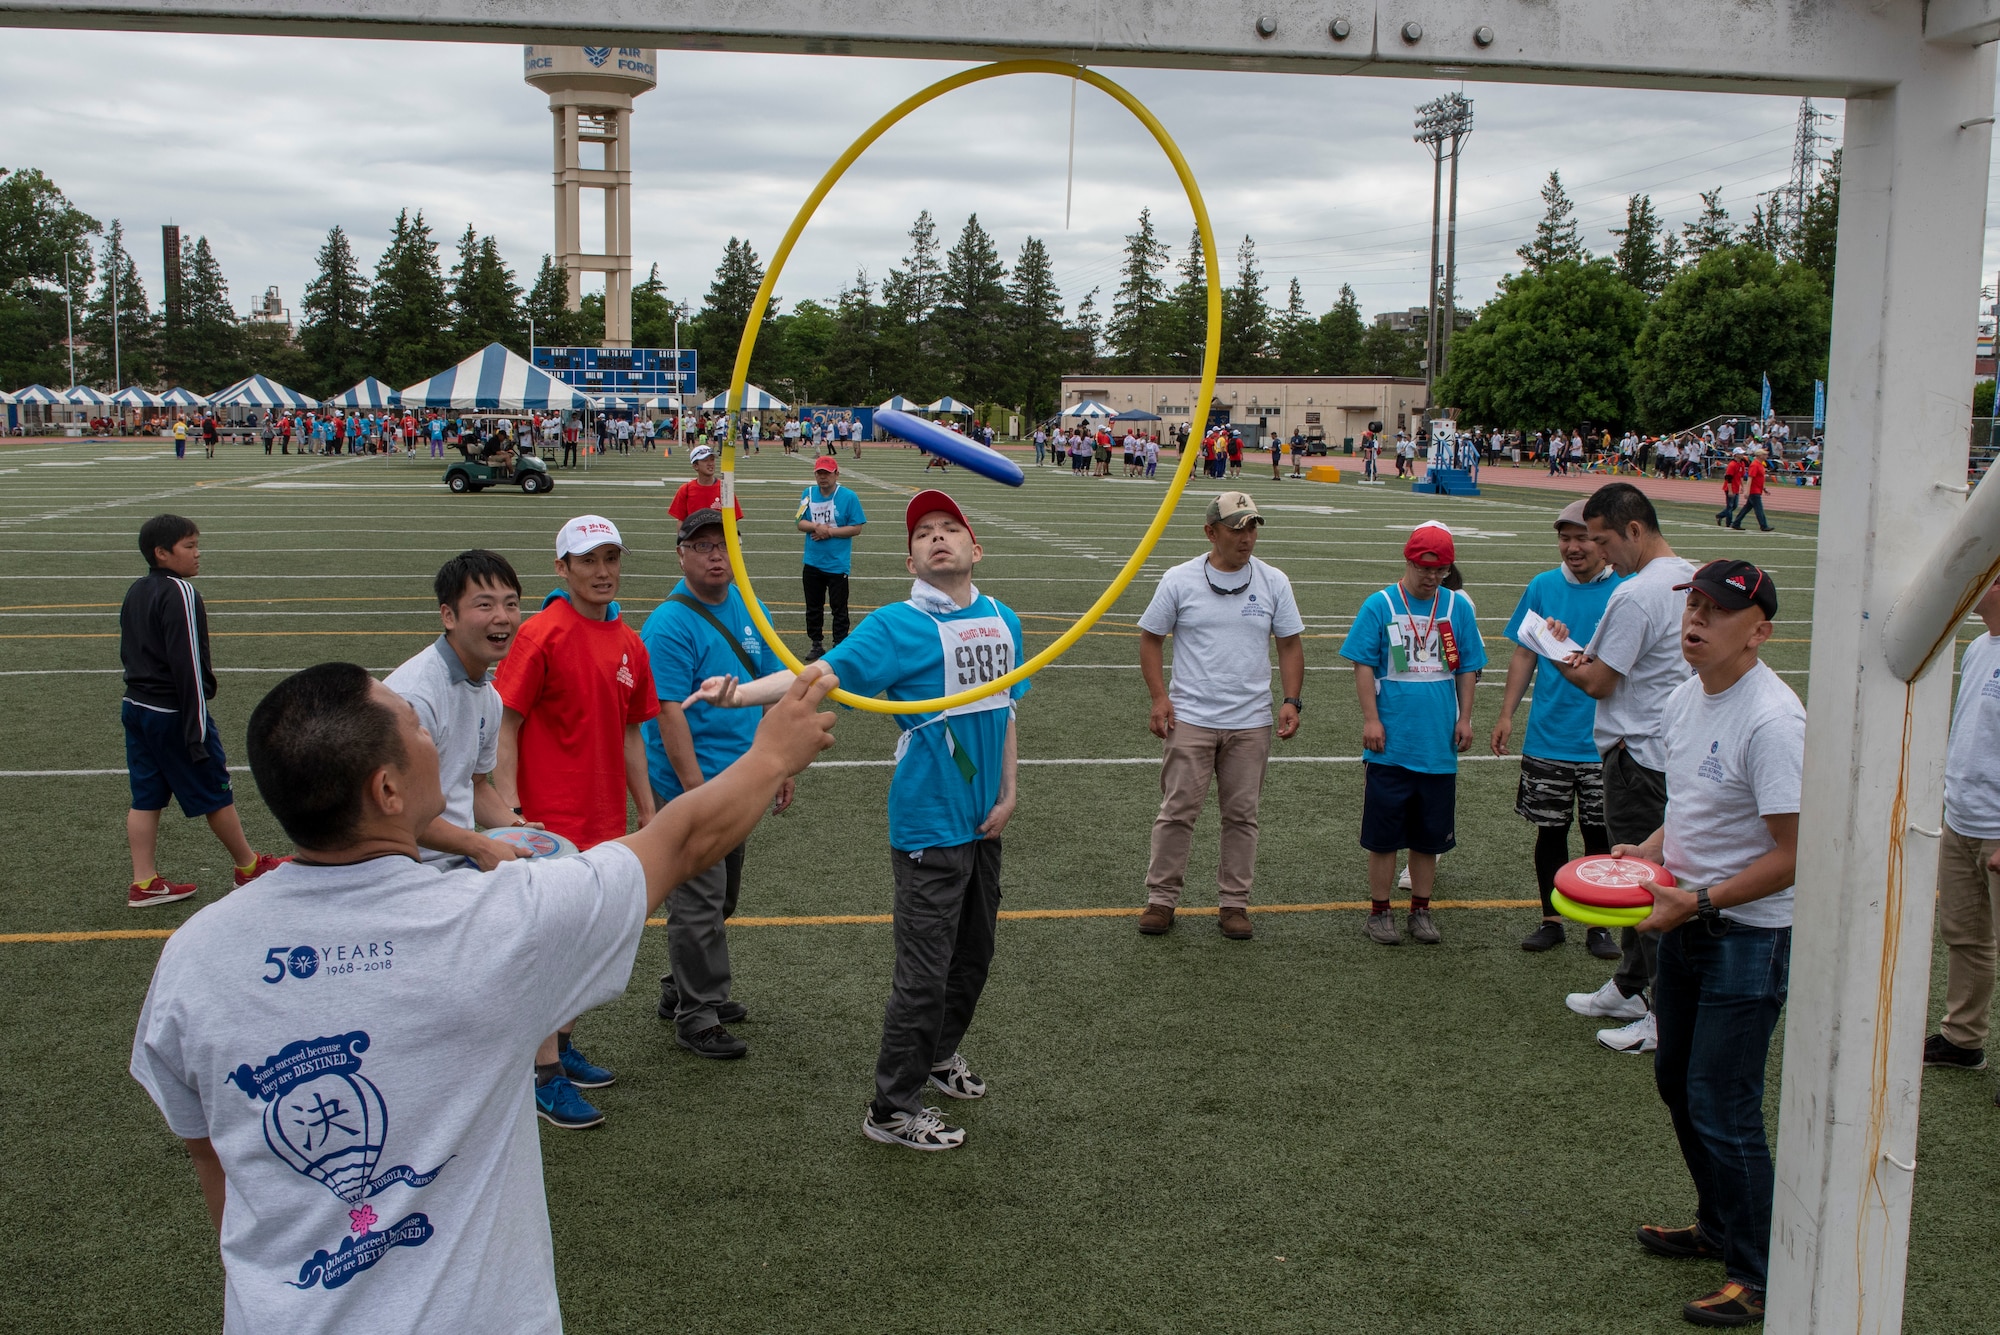 An athlete tosses a Frisbee through a hoop of the flying disc competition during the Kanto Plains Special Olympics at Yokota Air Base, Japan, May 19, 2018.